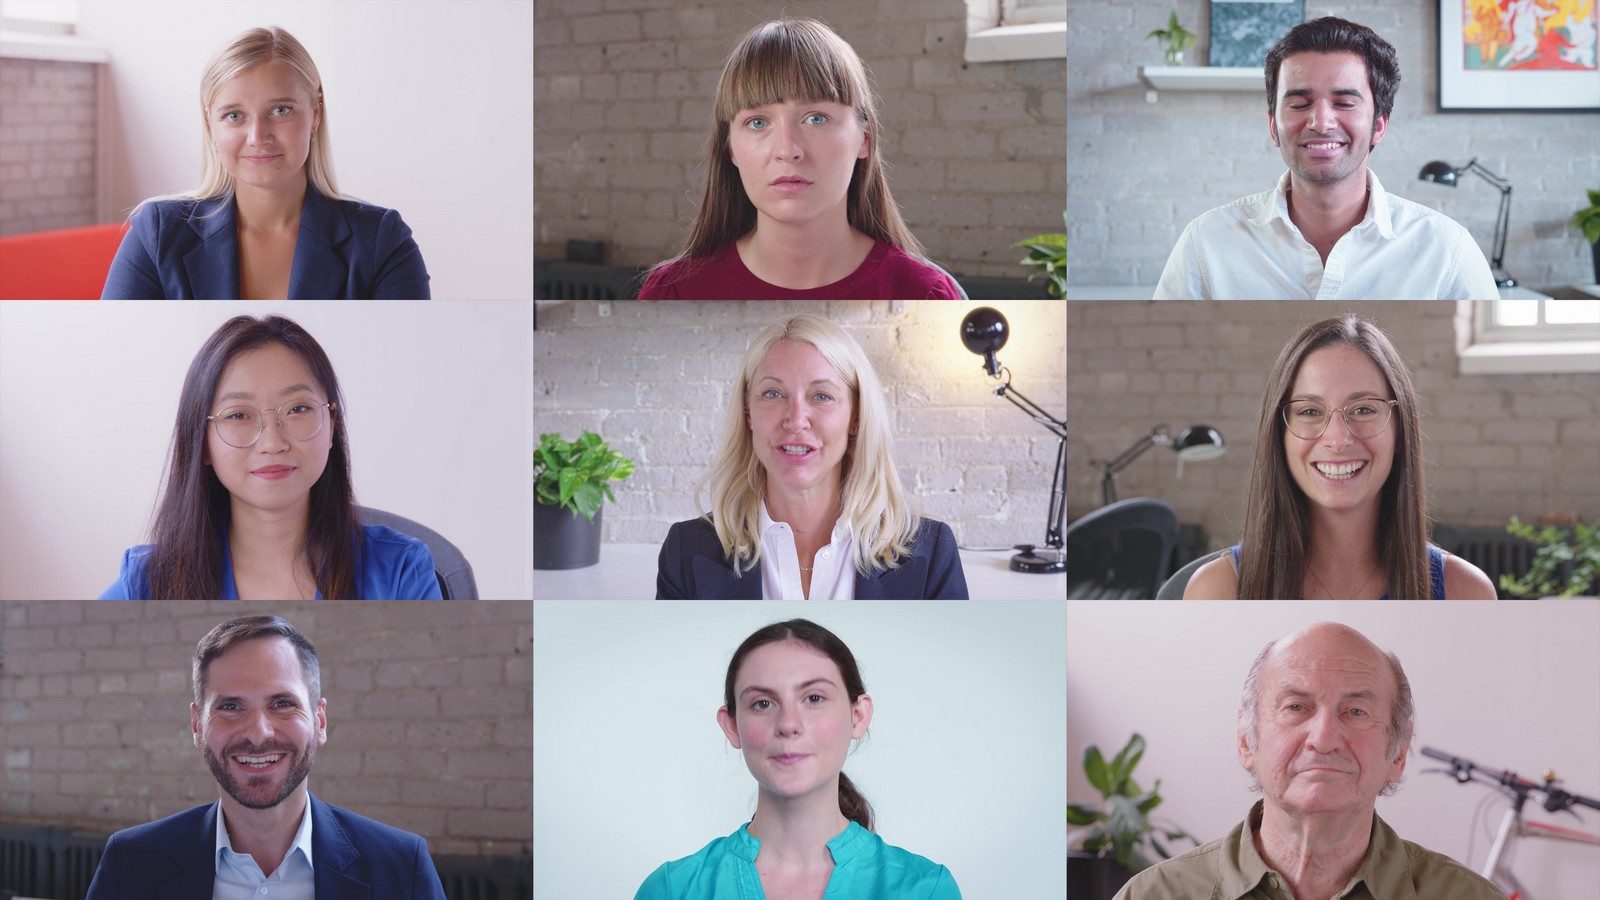 Video gallery of staff in an online meeting